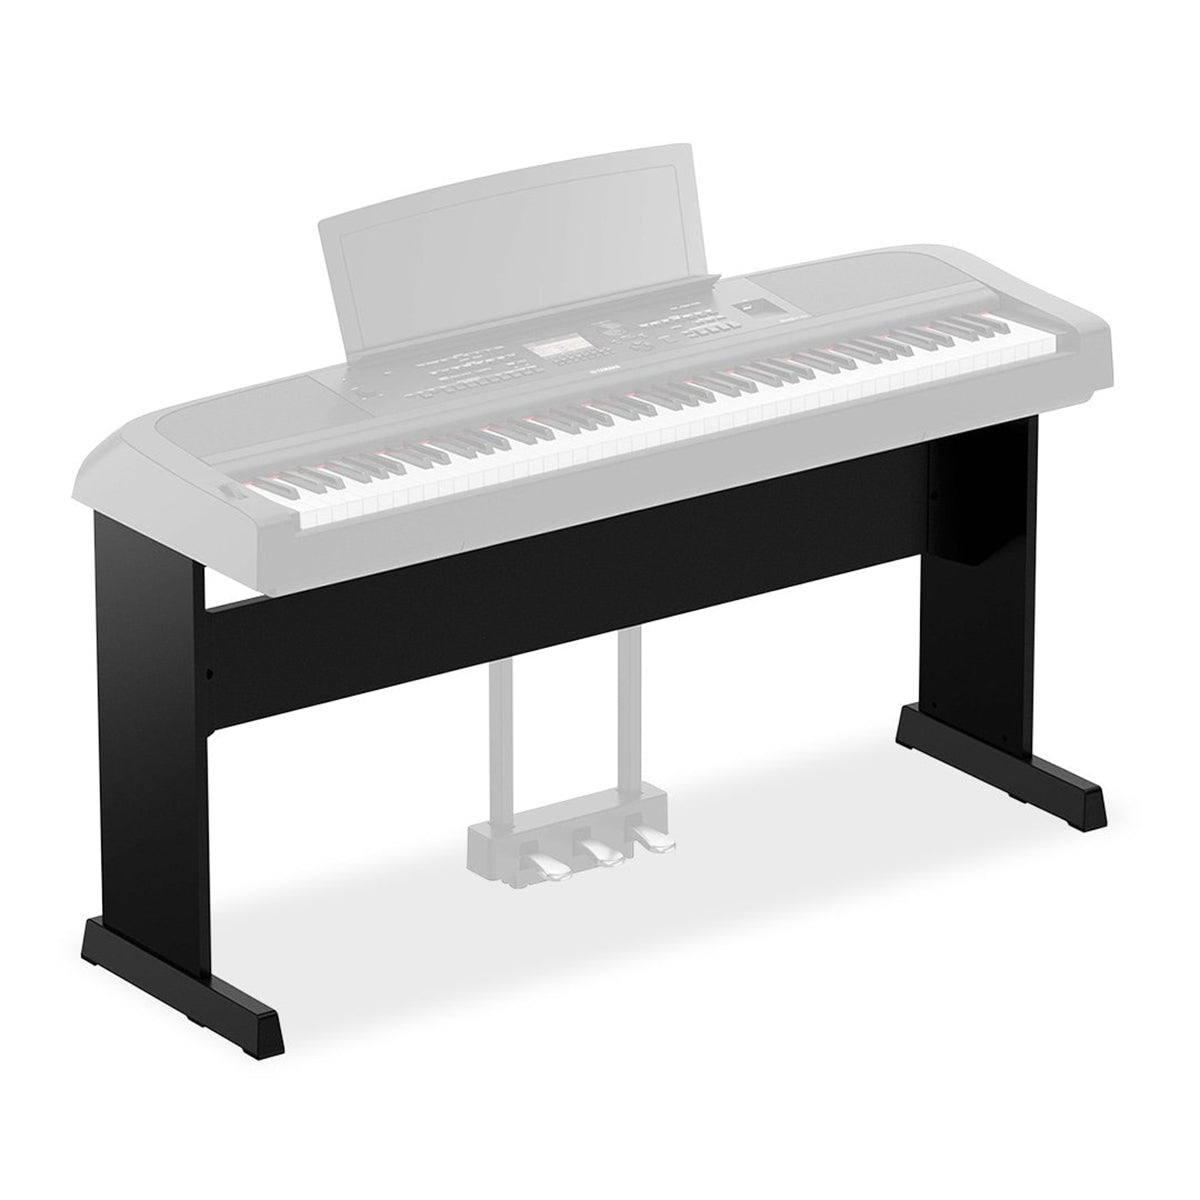 3/4 view of Yamaha L-300 Furniture-Style Piano Stand for DGX-670 - Black with semi-transparent image of Yamaha DGX-670 Portable Grand Digital Piano - Black (sold separately) for reference showing front, top and left side